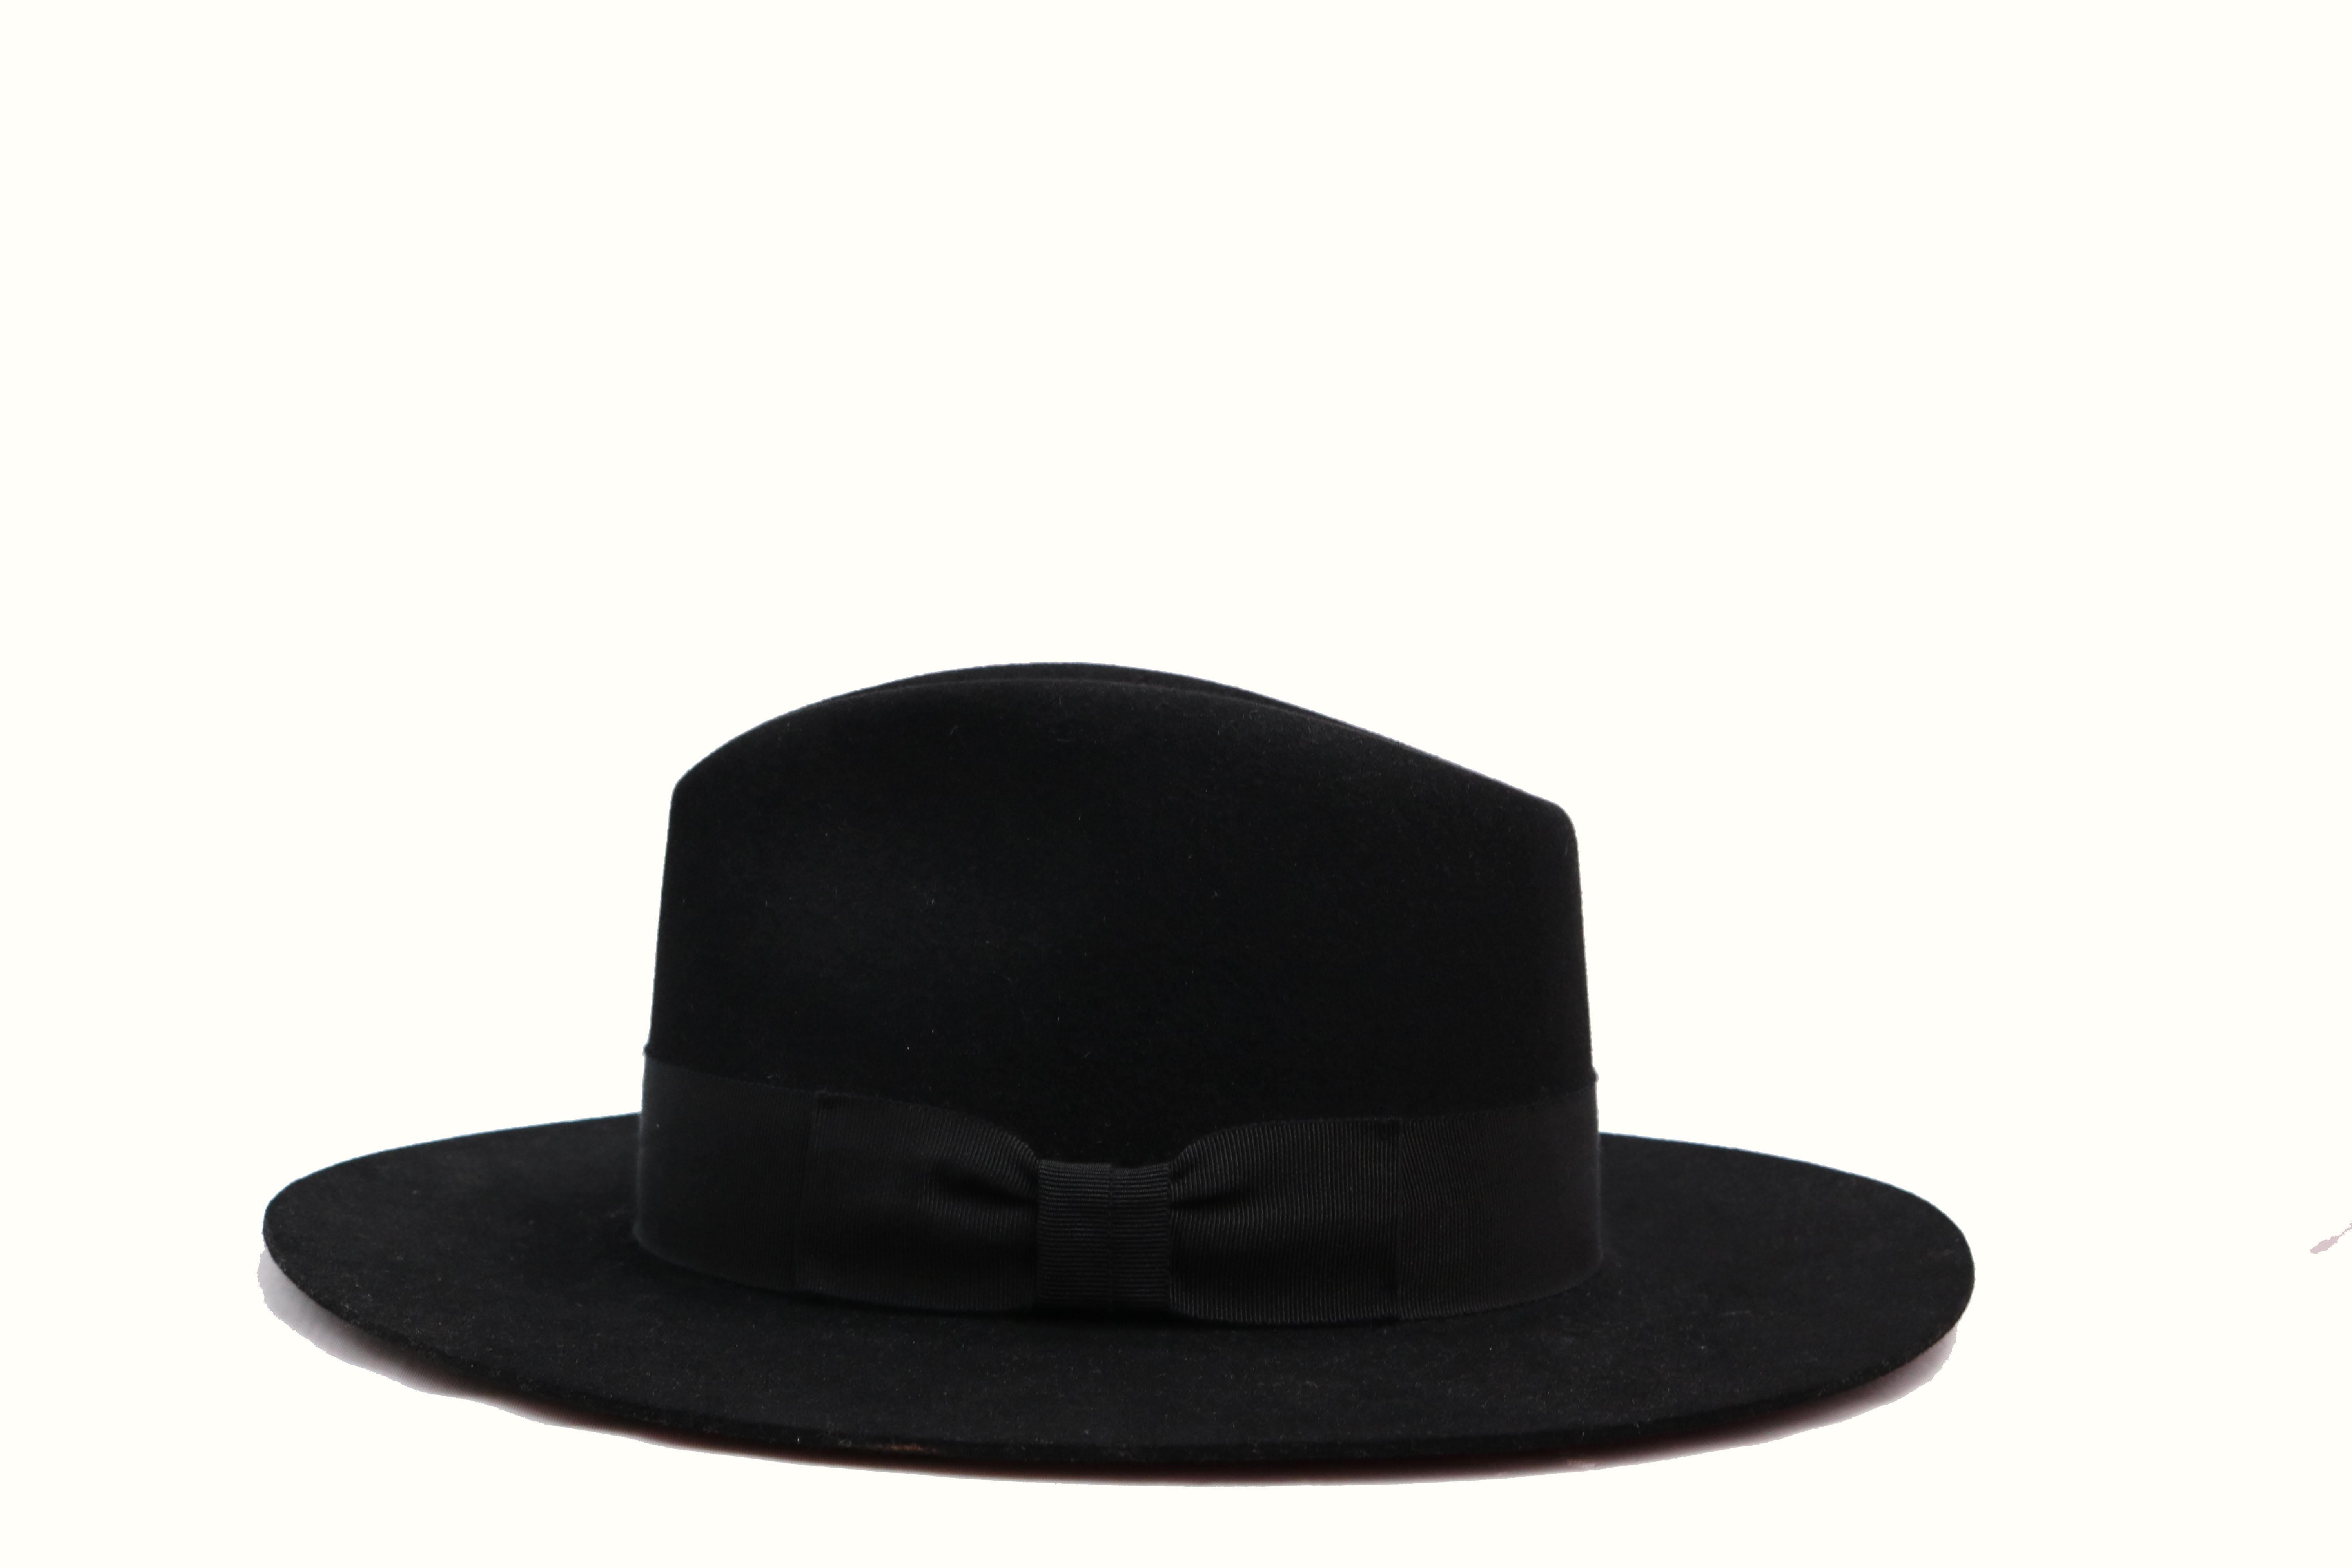 Classic felt fedora wool hat 
-Black
-Comes with the Box 
-Size 57